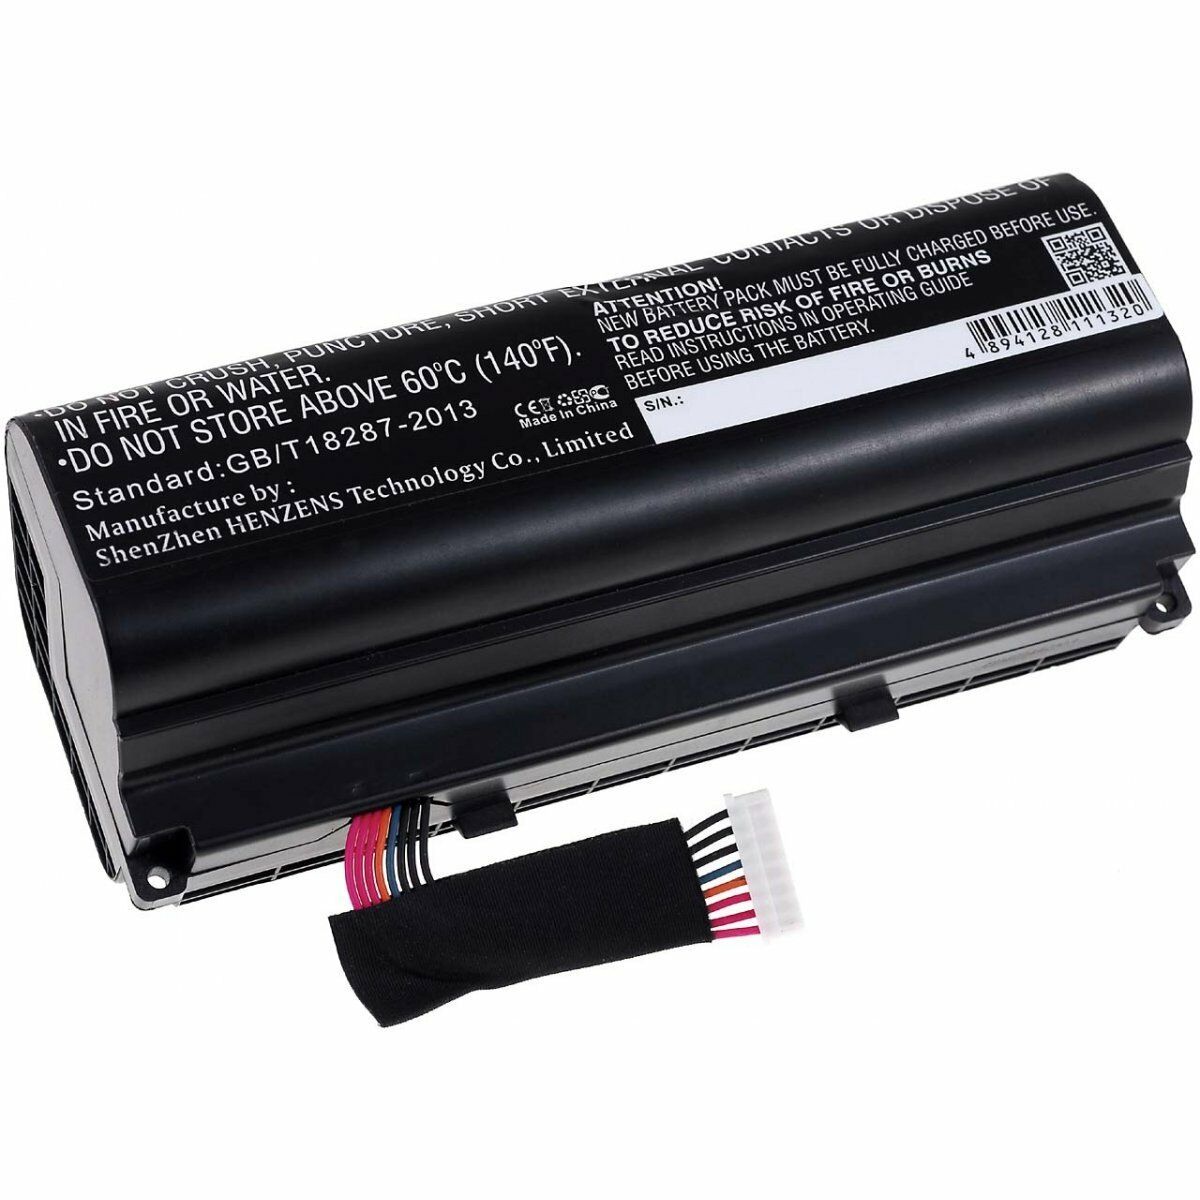 Batterie pour Asus G751J, G751J-BHI7T25, G751JL-BSi7T28 15V Li-Ion(compatible)